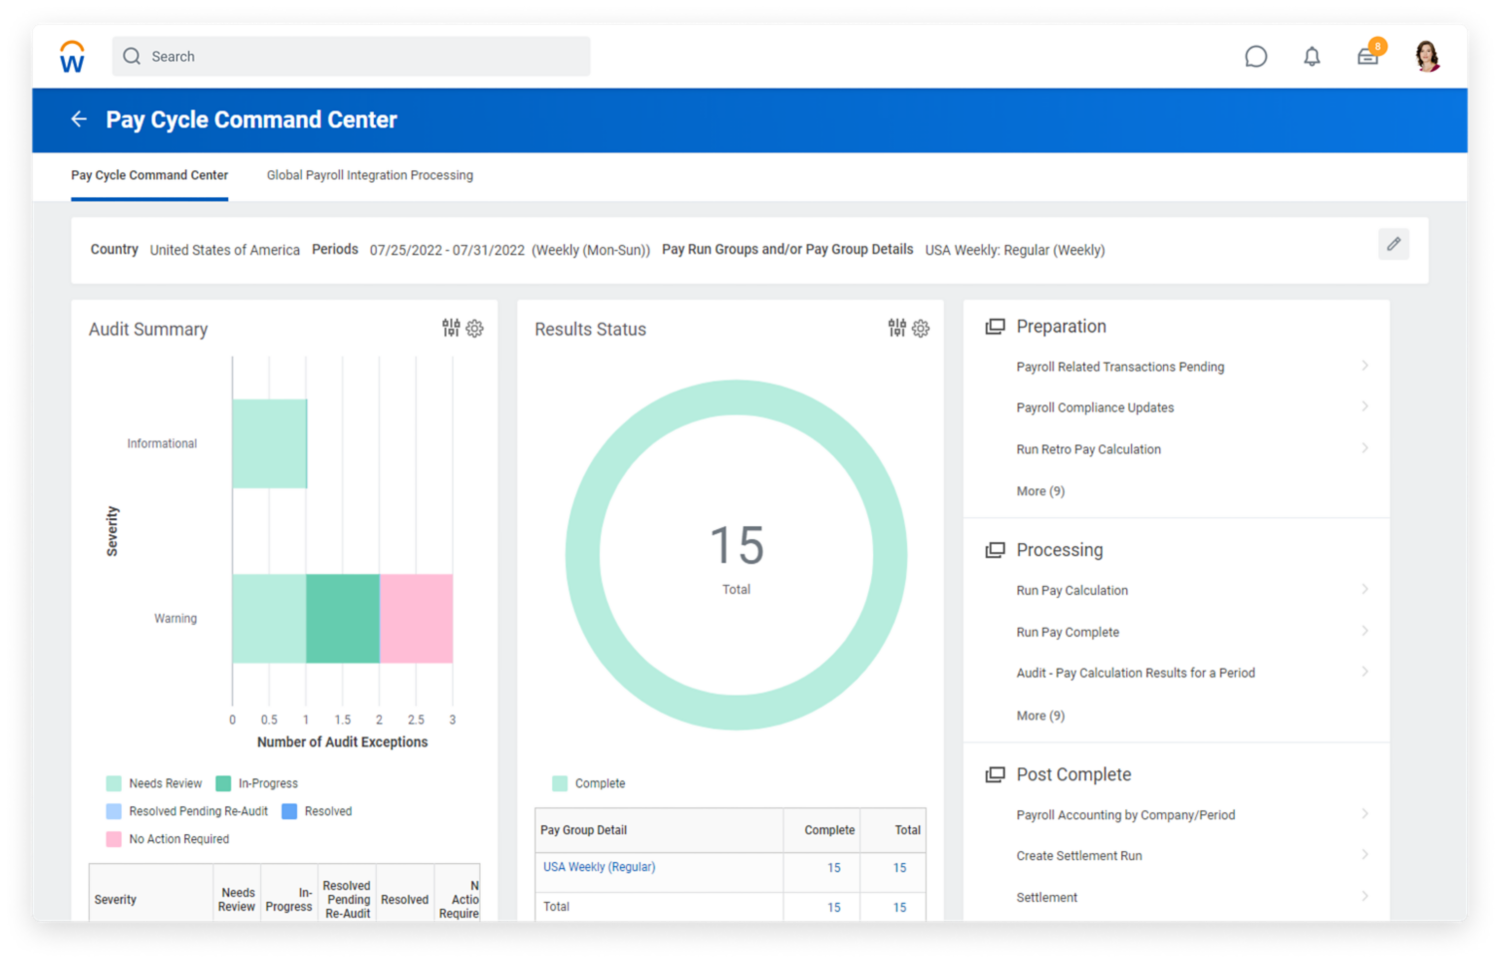 Pay cycle command centre dashboard with graphs for audit summary, results status and accounting summary